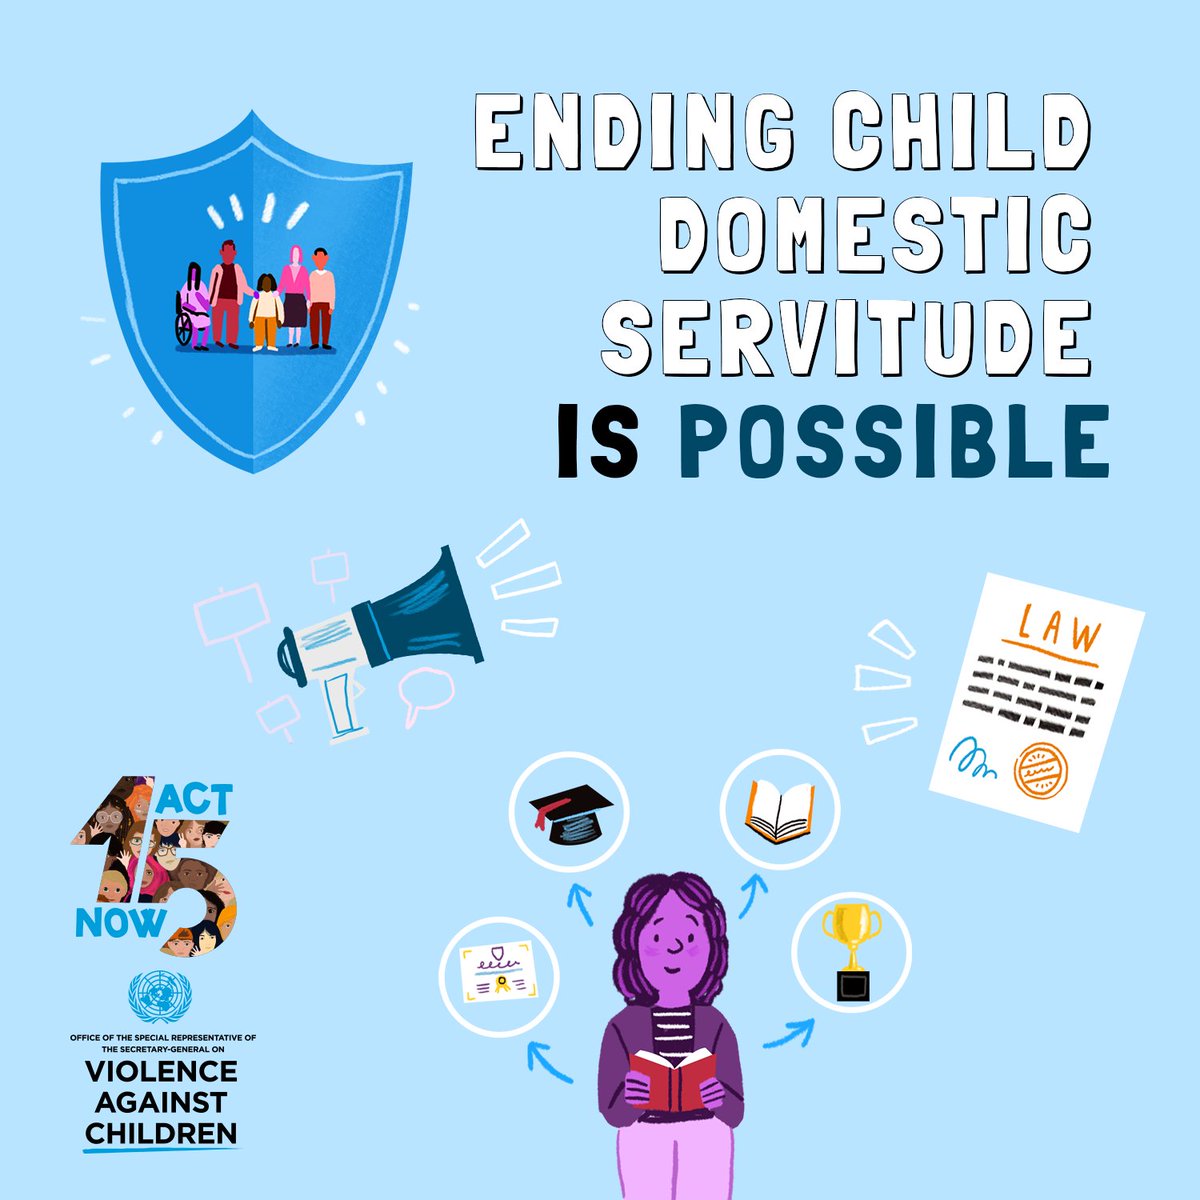 It is estimated globally that at least 17.2 million children work as #DomesticWorkers, of whom over half (11.2 million) are aged between 5 to 14 years. But it is widely unreported, so numbers are likely to be higher. 🔗violenceagainstchildren.un.org/sites/violence… #ActNOWToEndVAC